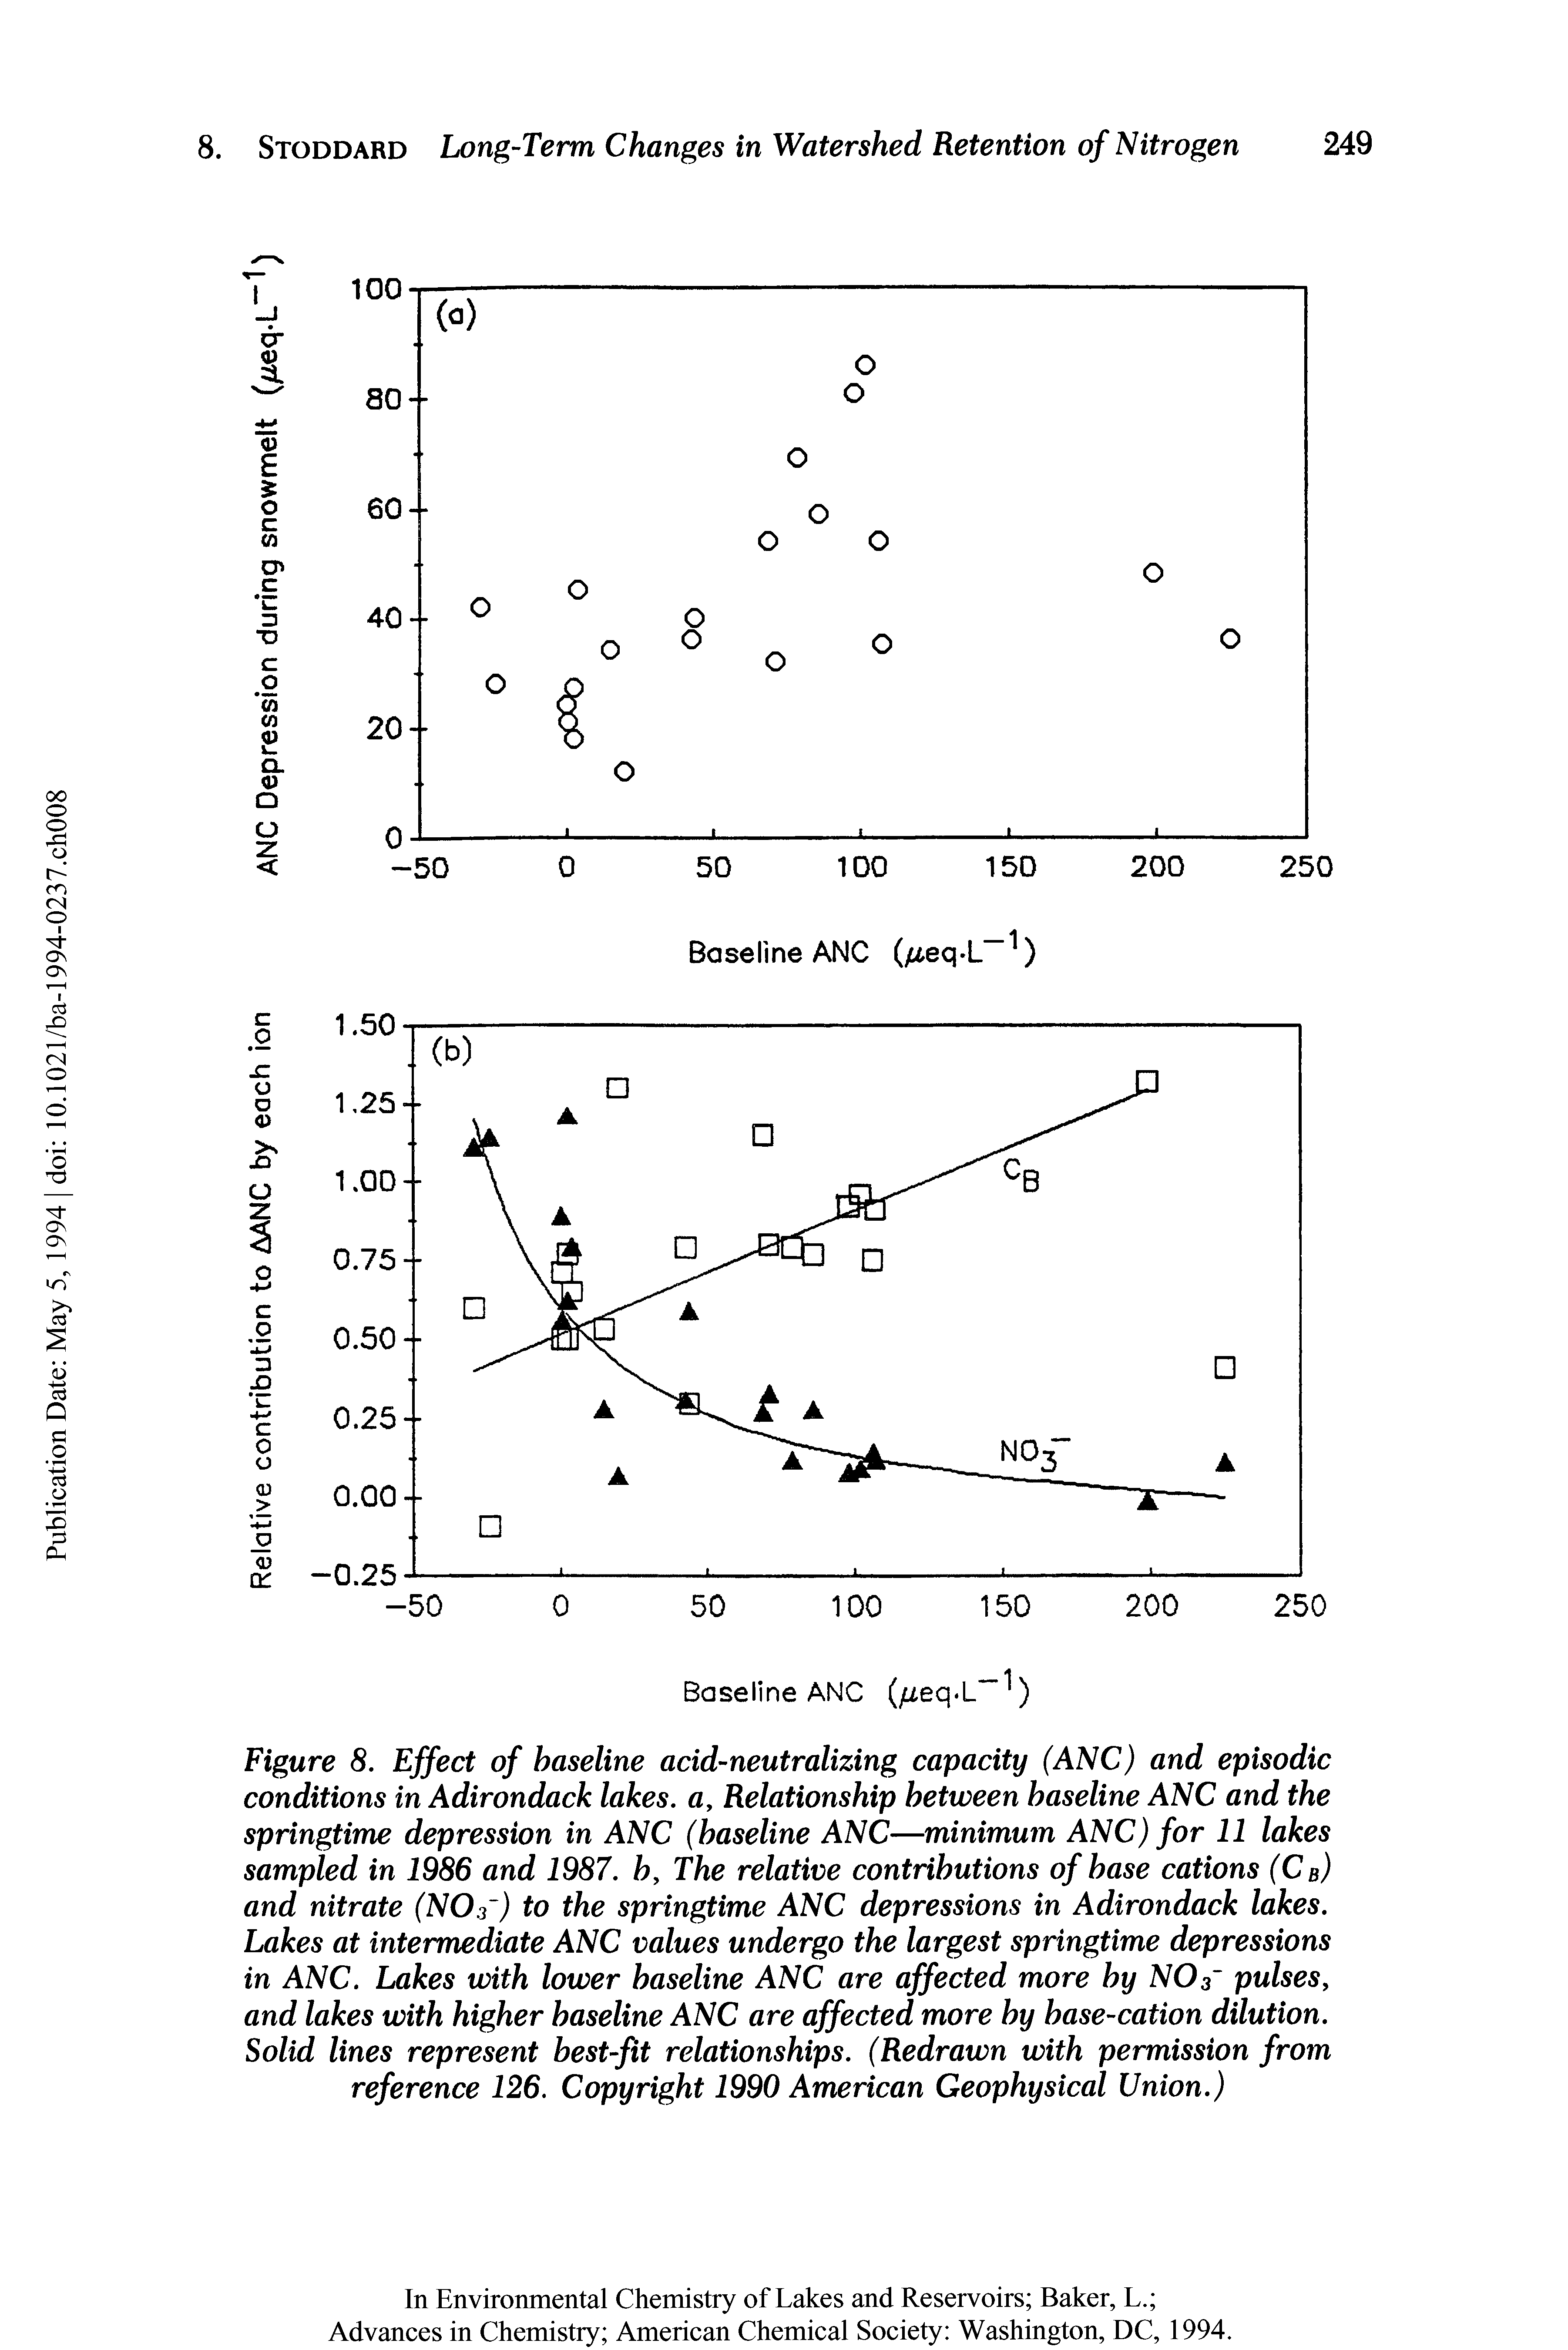 Figure 8. Effect of baseline acid-neutralizing capacity (ANC) and episodic conditions in Adirondack lakes, a, Relationship between baseline ANC and the springtime depression in ANC (baseline ANC—minimum ANC) for 11 lakes sampled in 1986 and 1987. b, The relative contributions of base cations (Cb) and nitrate (N03 ) to the springtime ANC depressions in Adirondack lakes. Lakes at intermediate ANC values undergo the largest springtime depressions in ANC. Lakes with lower baseline ANC are affected more by N03 pulses, and lakes with higher baseline ANC are affected more by base-cation dilution. Solid lines represent best-fit relationships. (Redrawn with permission from reference 126. Copyright 1990 American Geophysical Union.)...